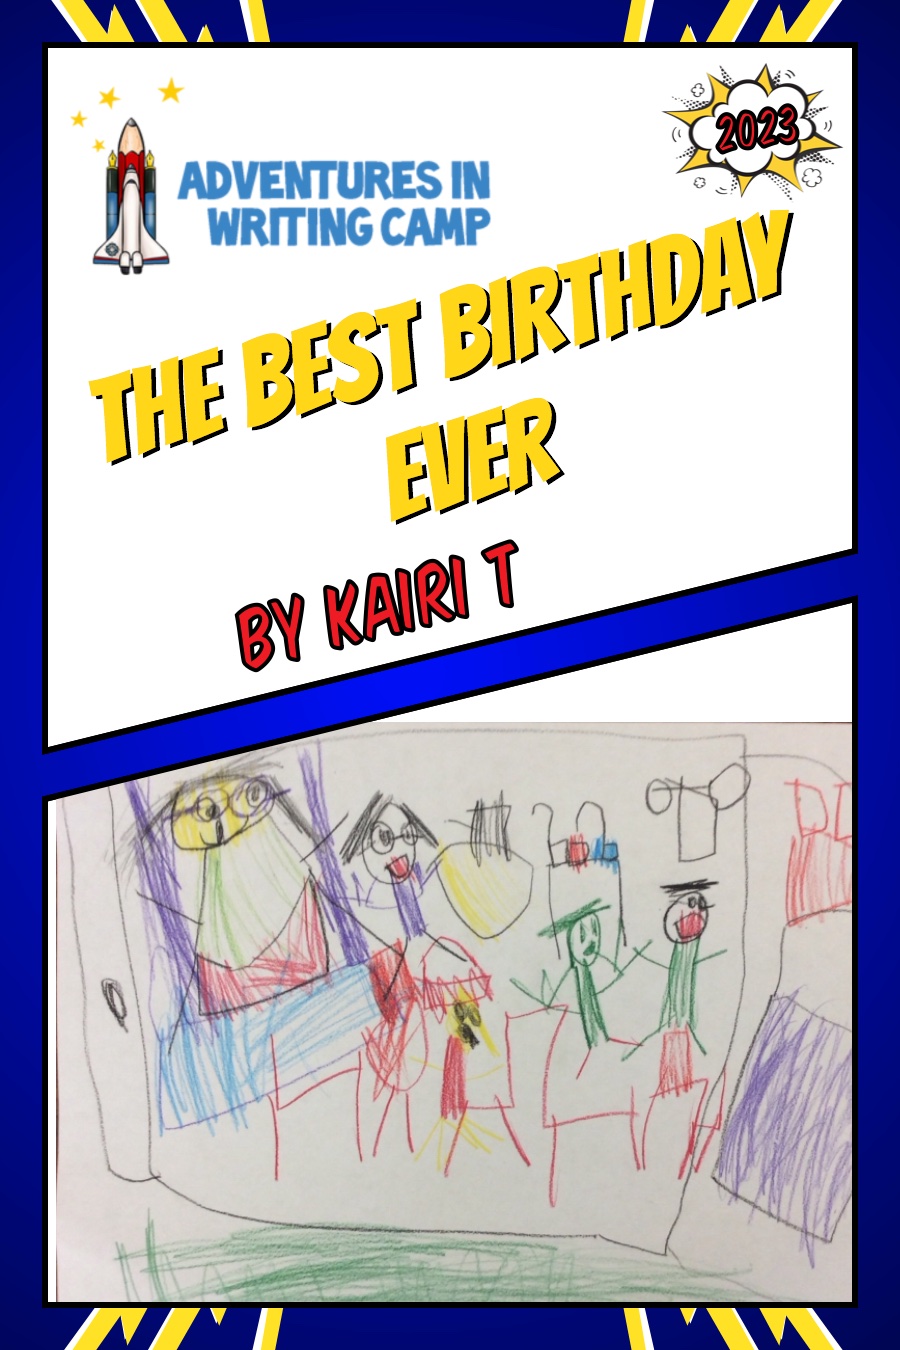 The Best Birthday Ever by Kairi T